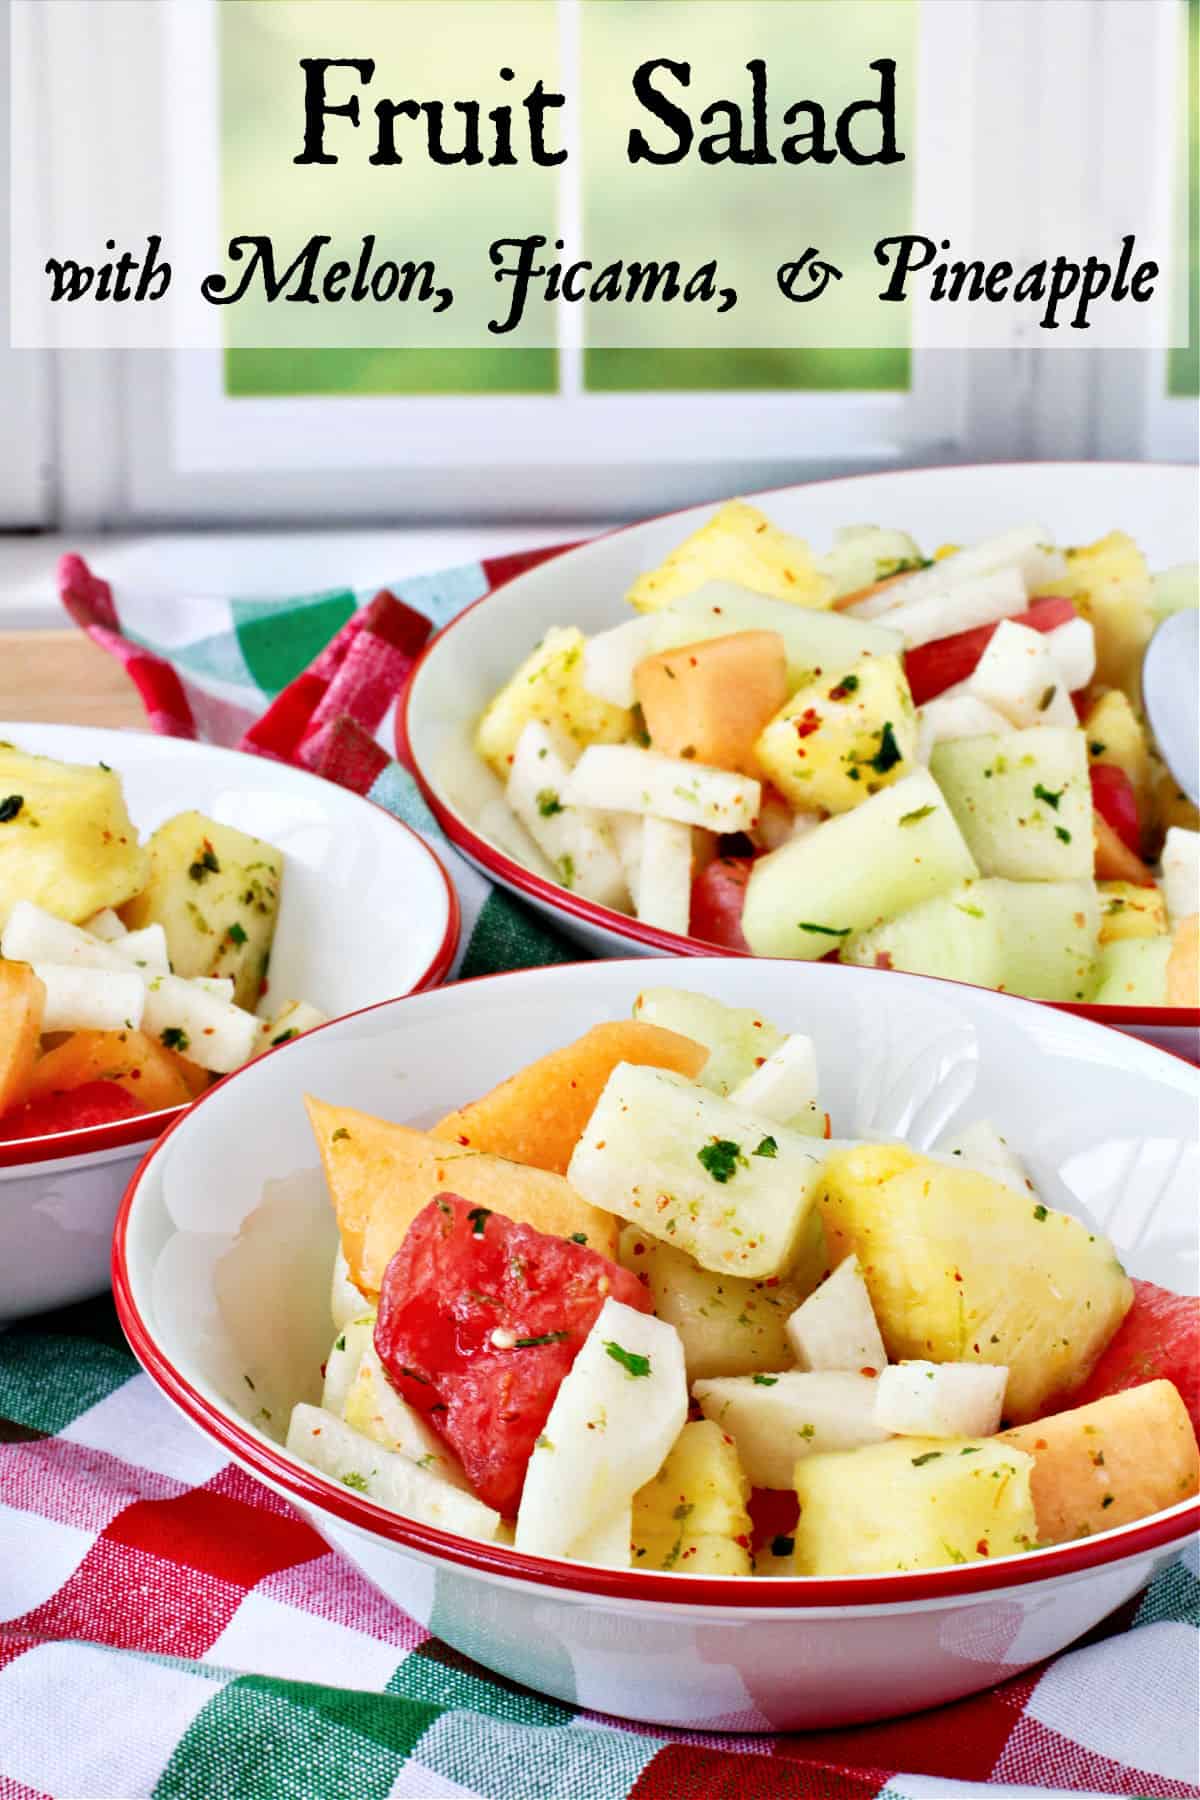 Melon, Jicama, and Pineapple Salad in bowls with red rims.